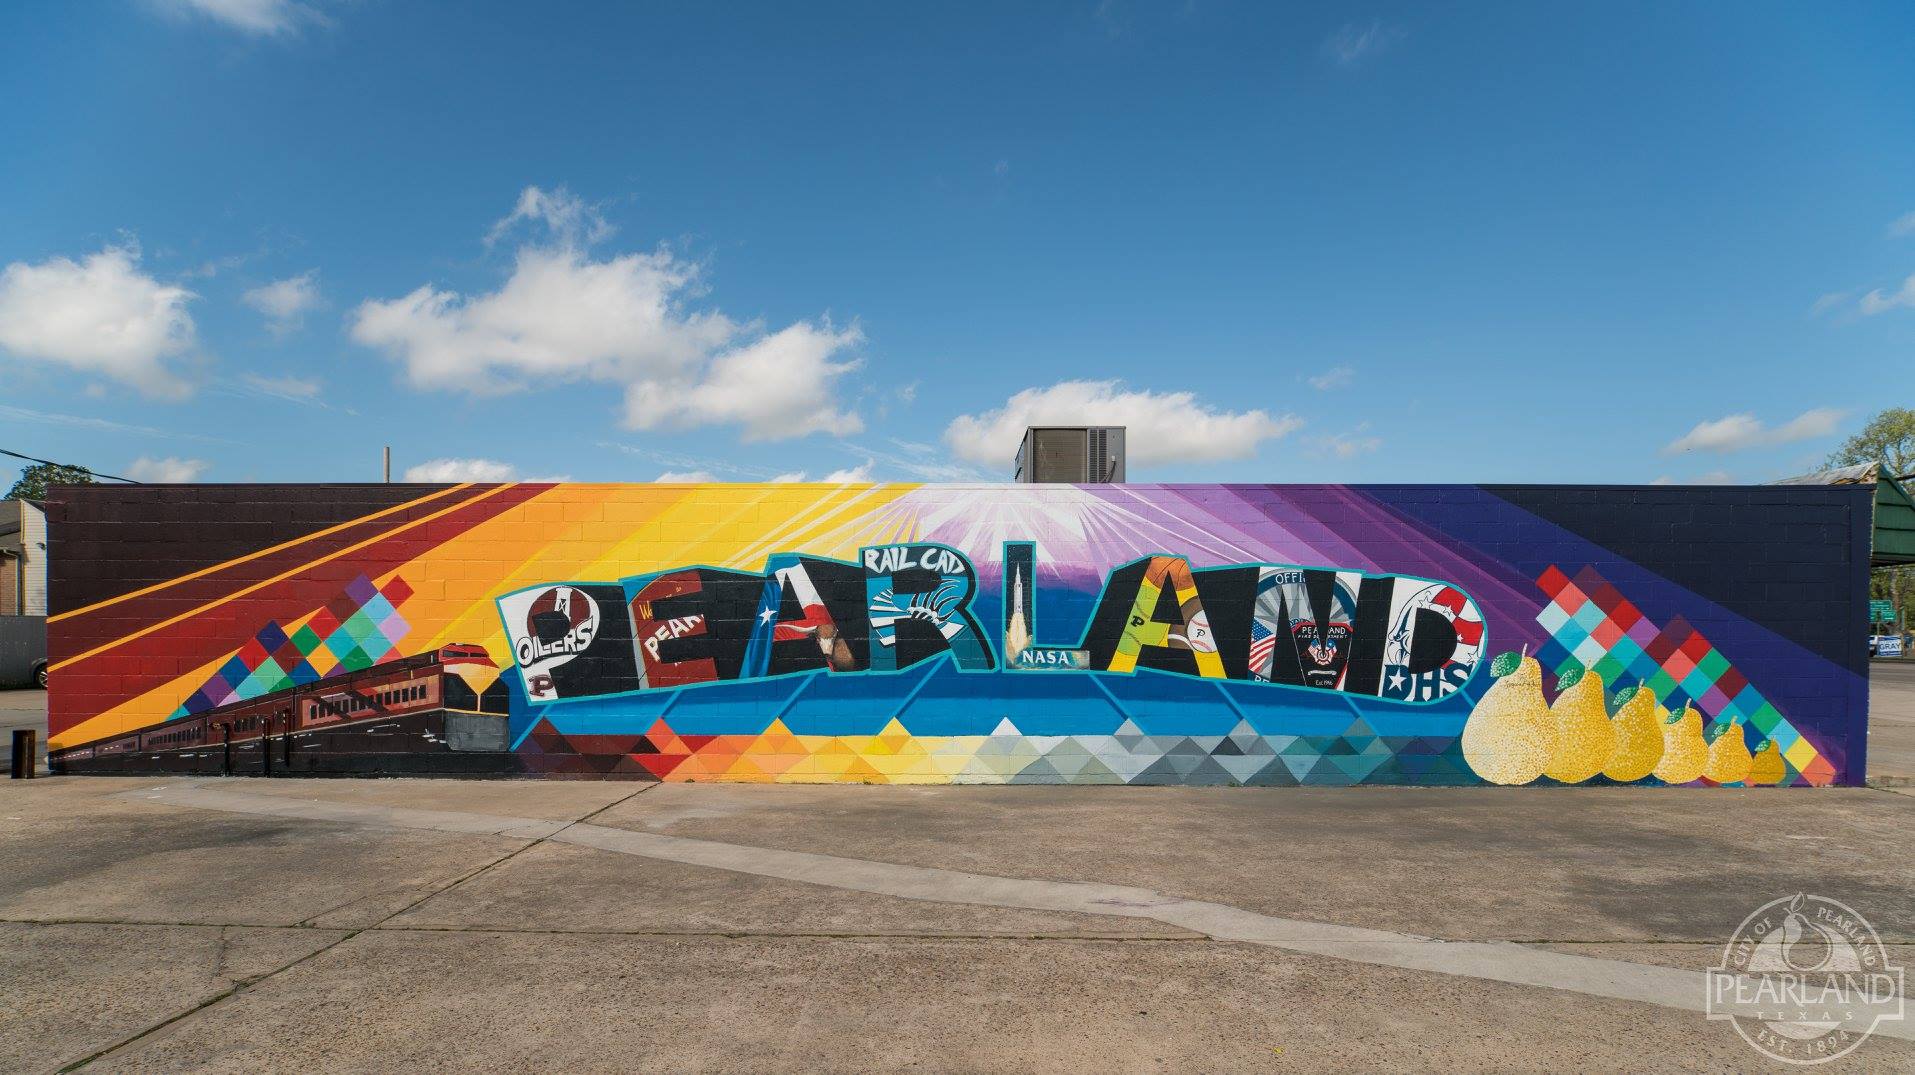 Pearland steps up its Instagram game with catchy new mural - Houston Chronicle